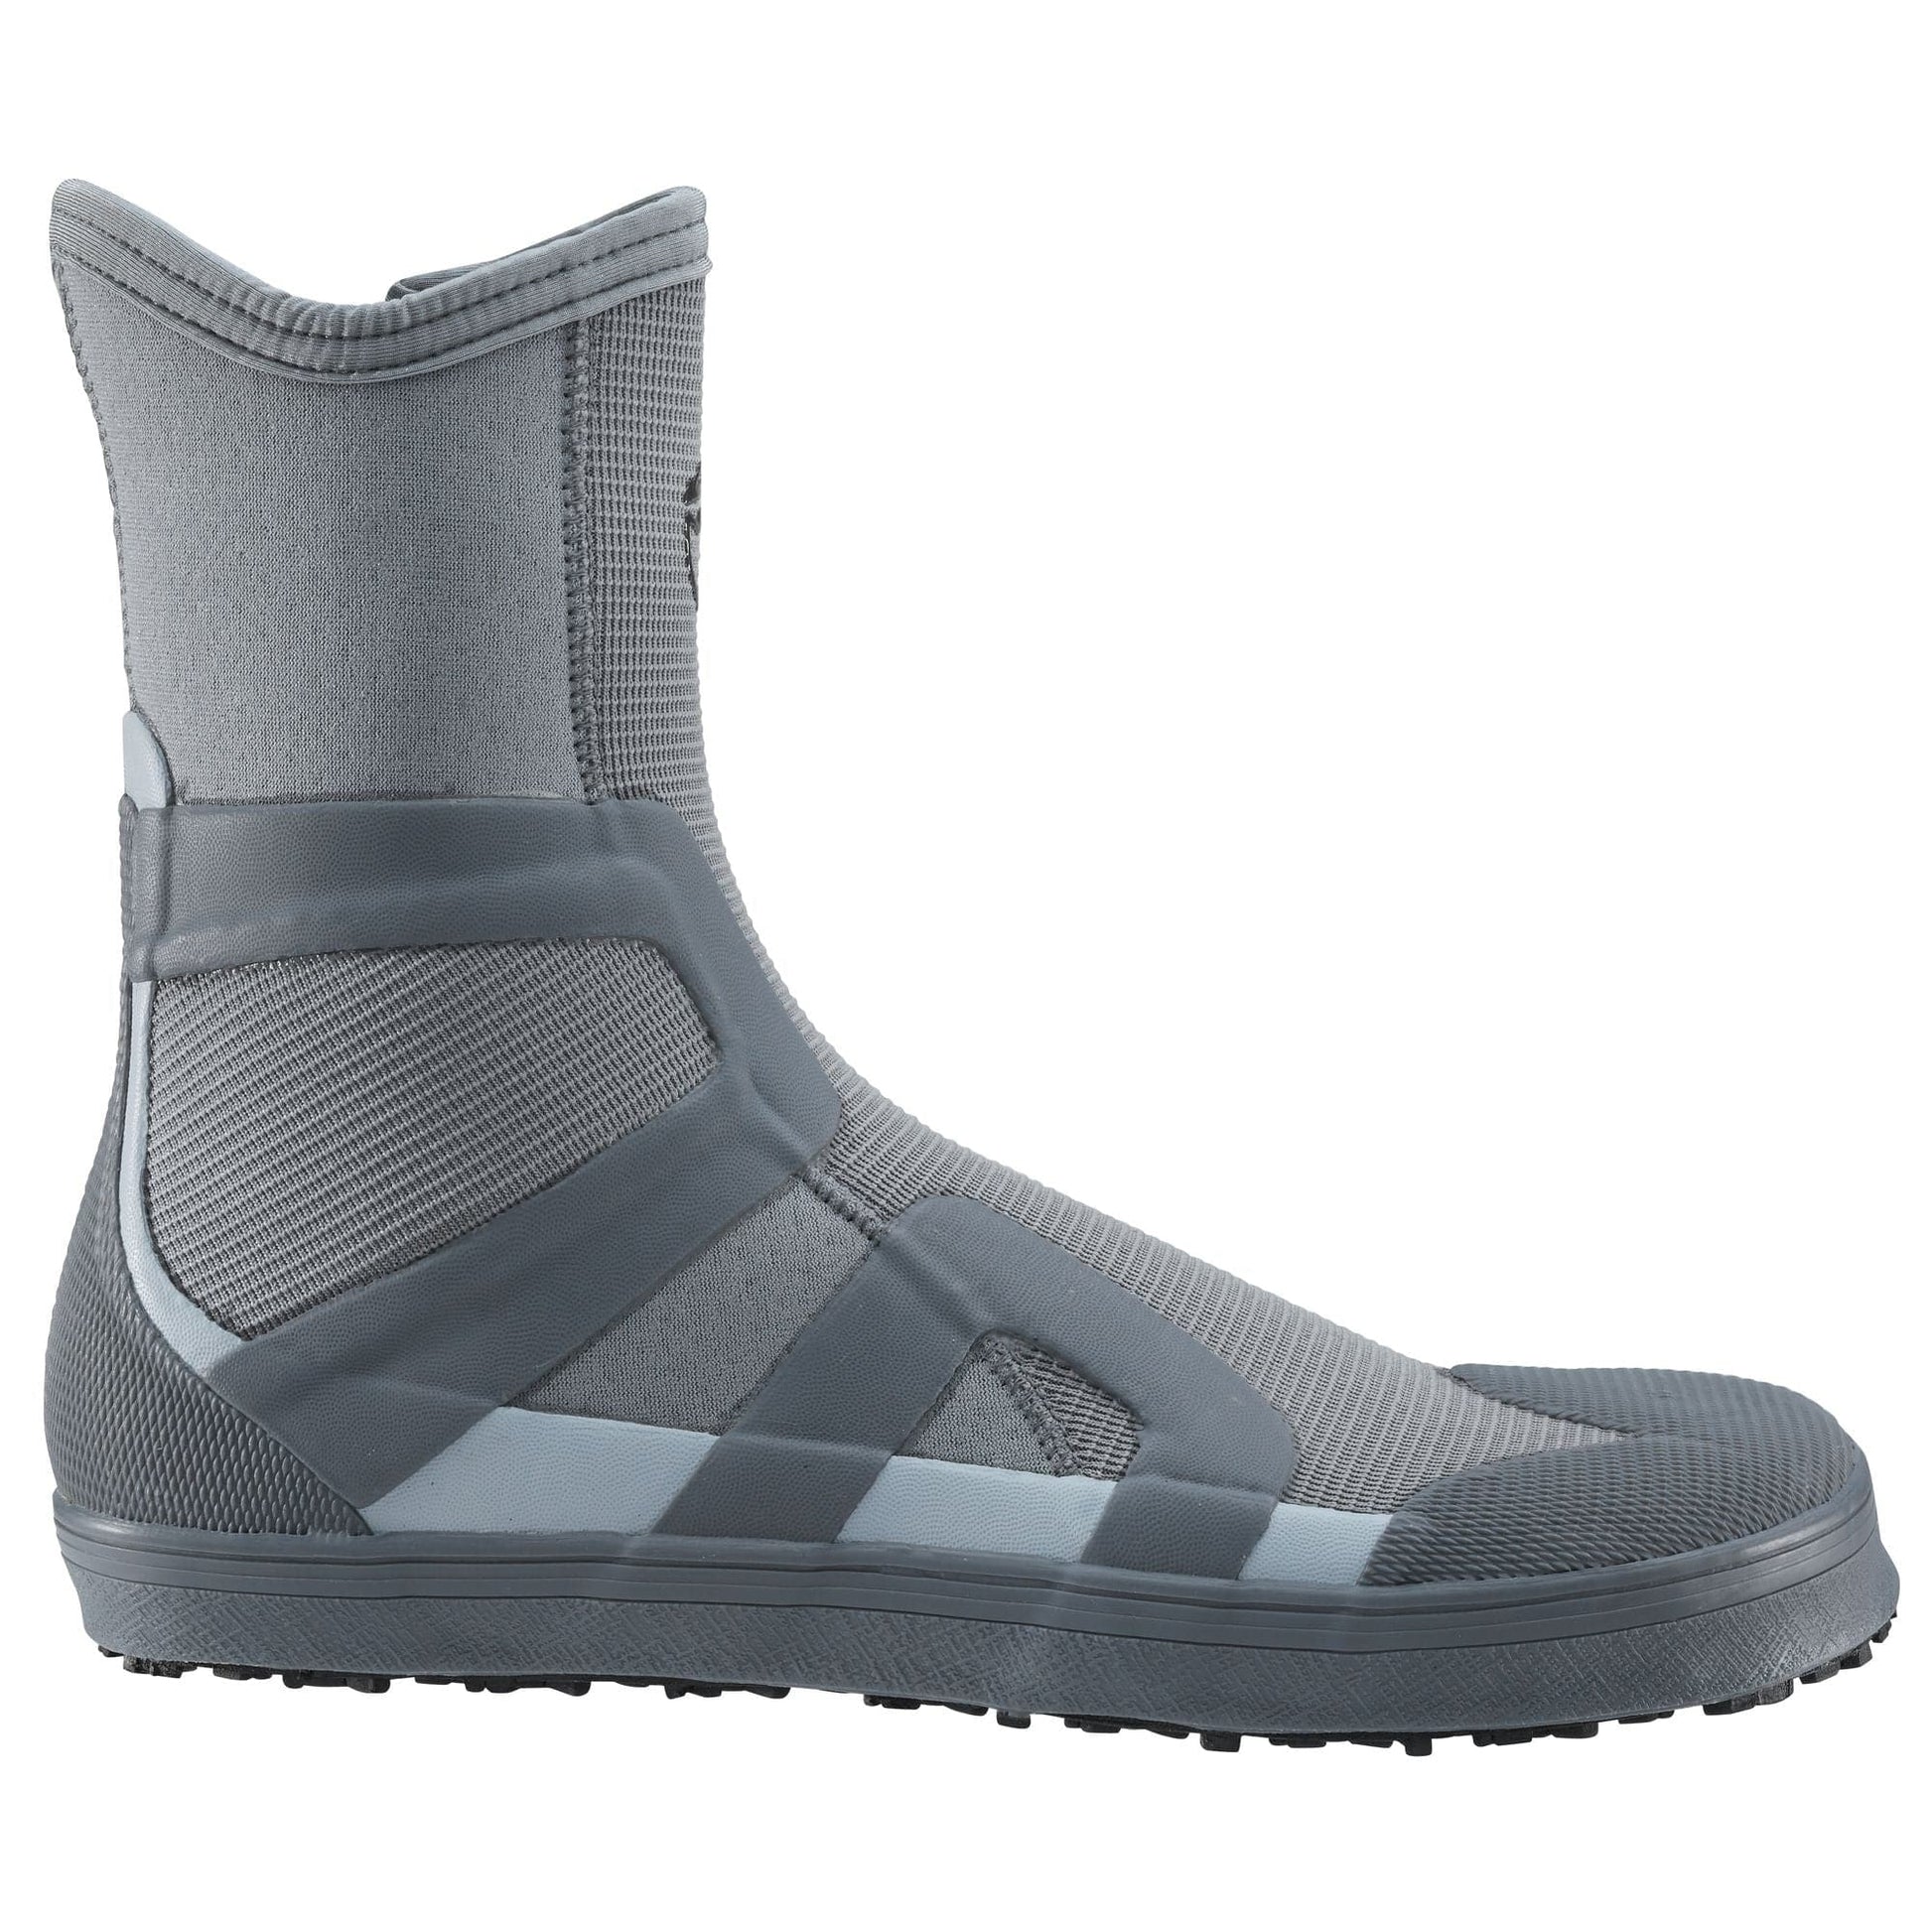 Featuring the Backwater Wetshoe men's footwear, women's footwear manufactured by NRS shown here from a third angle.